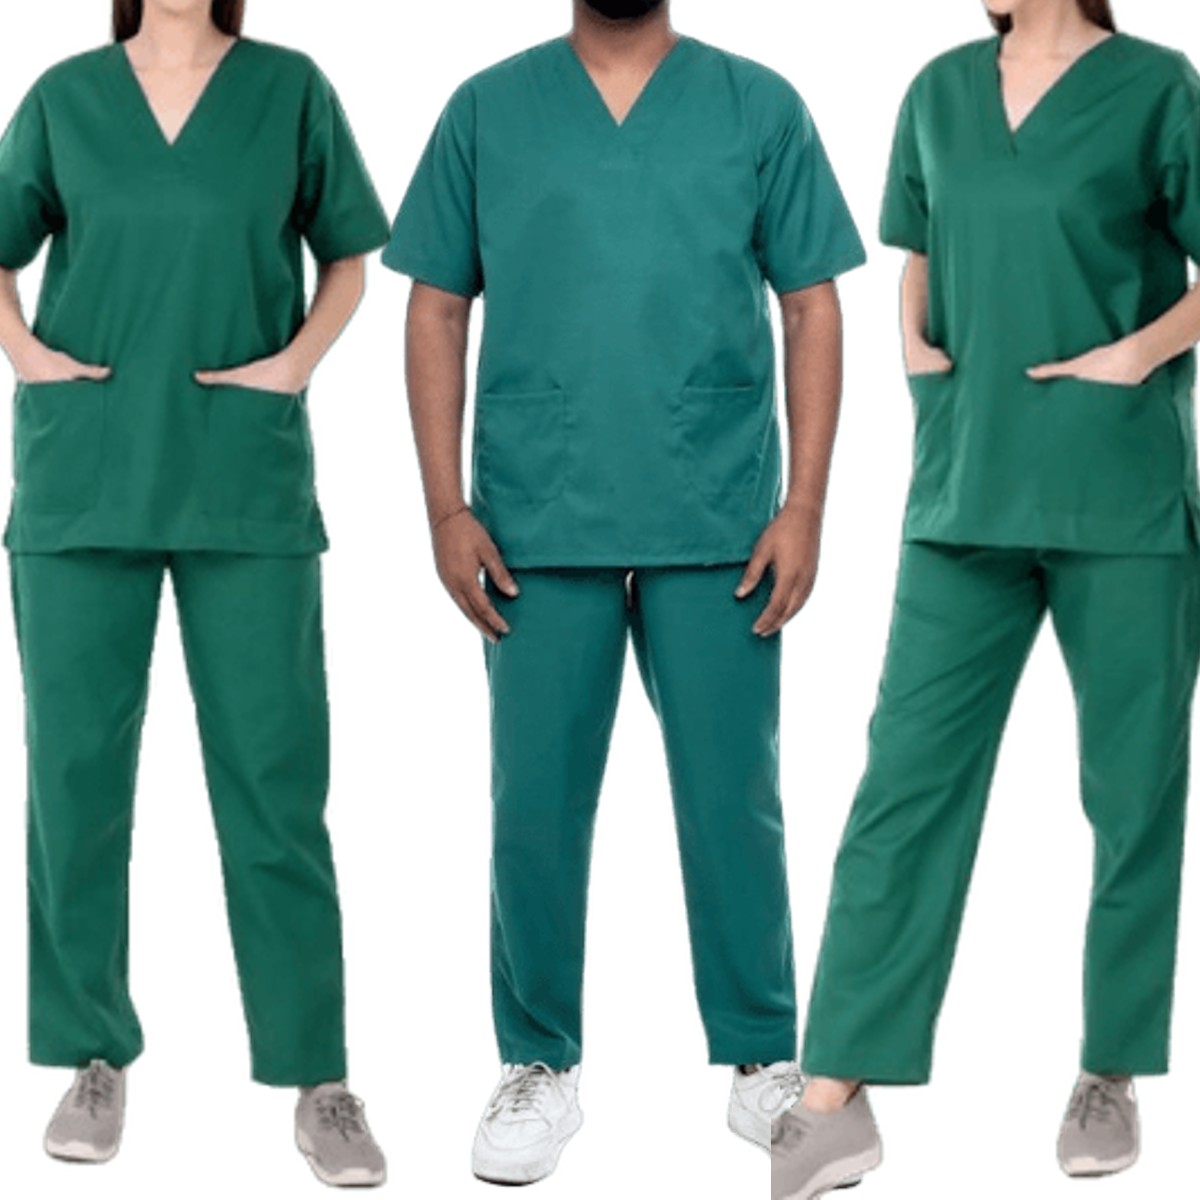 PROTECTIVE CLOTHING CLASS 1 HS CODE: 6210103000 | Africa Medical Supplies  Platform